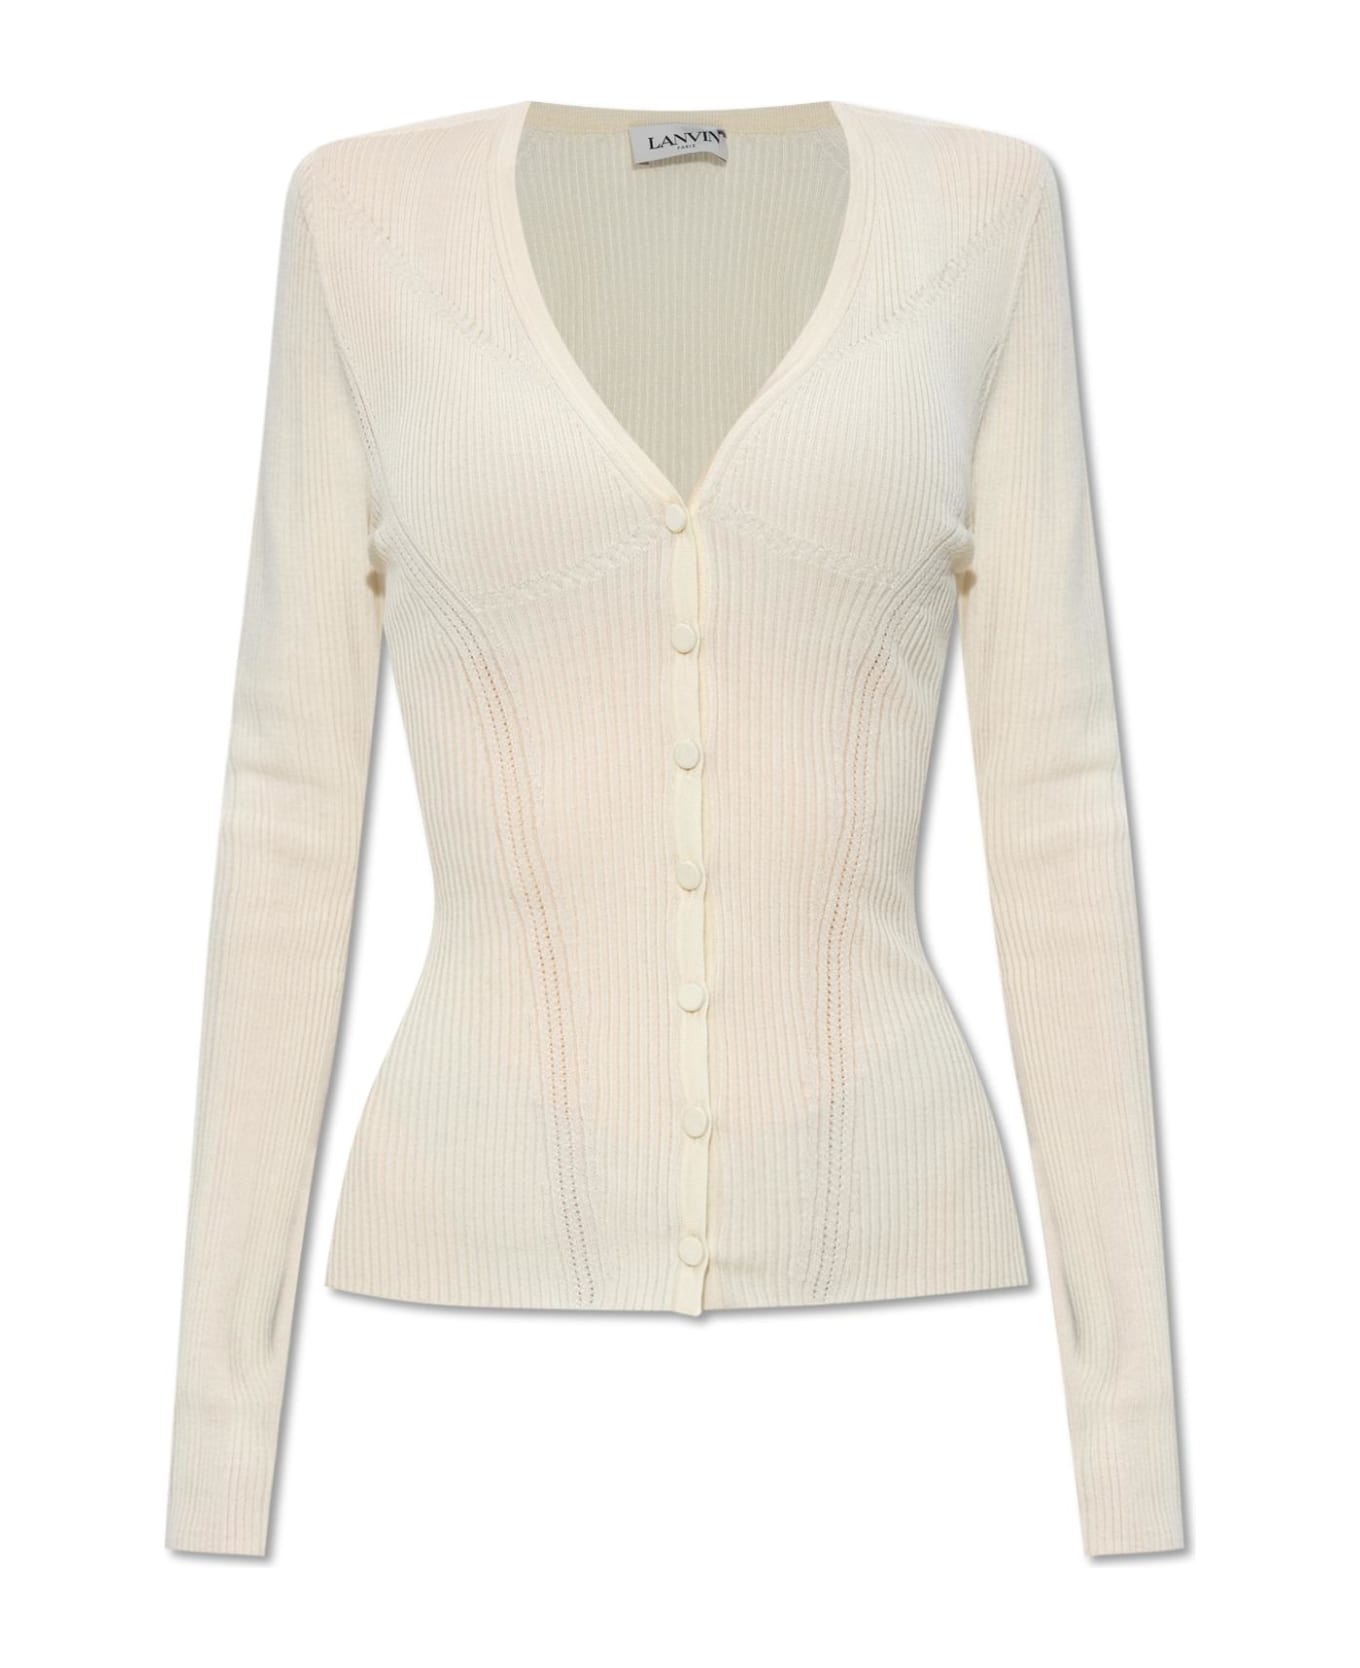 Lanvin Cardigan With Long Sleeves - WHITE